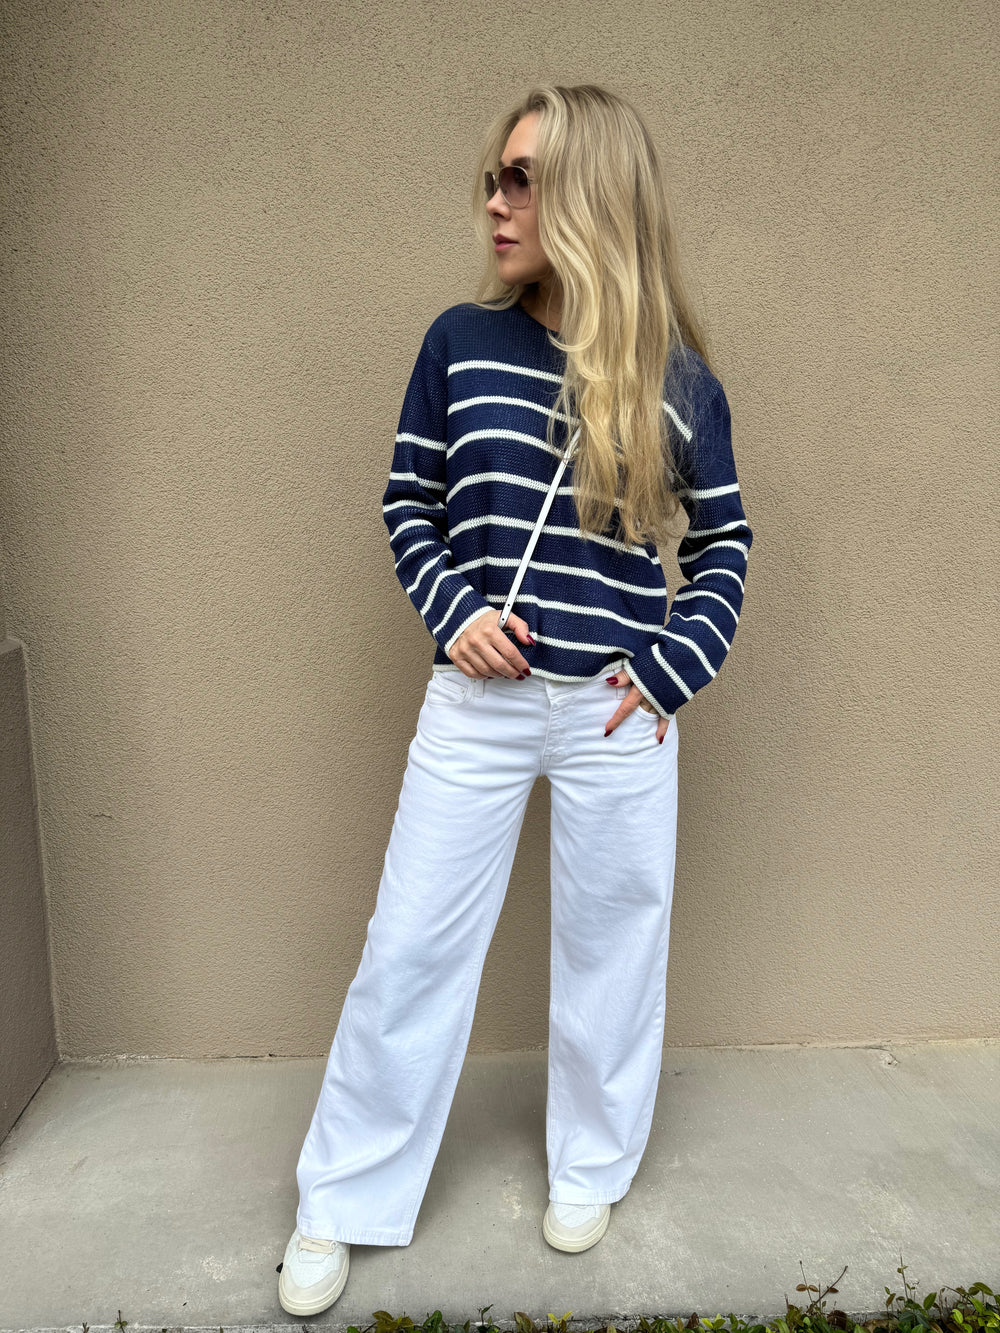 Plaited Reversible Stripe Pullover in Midnight Combo